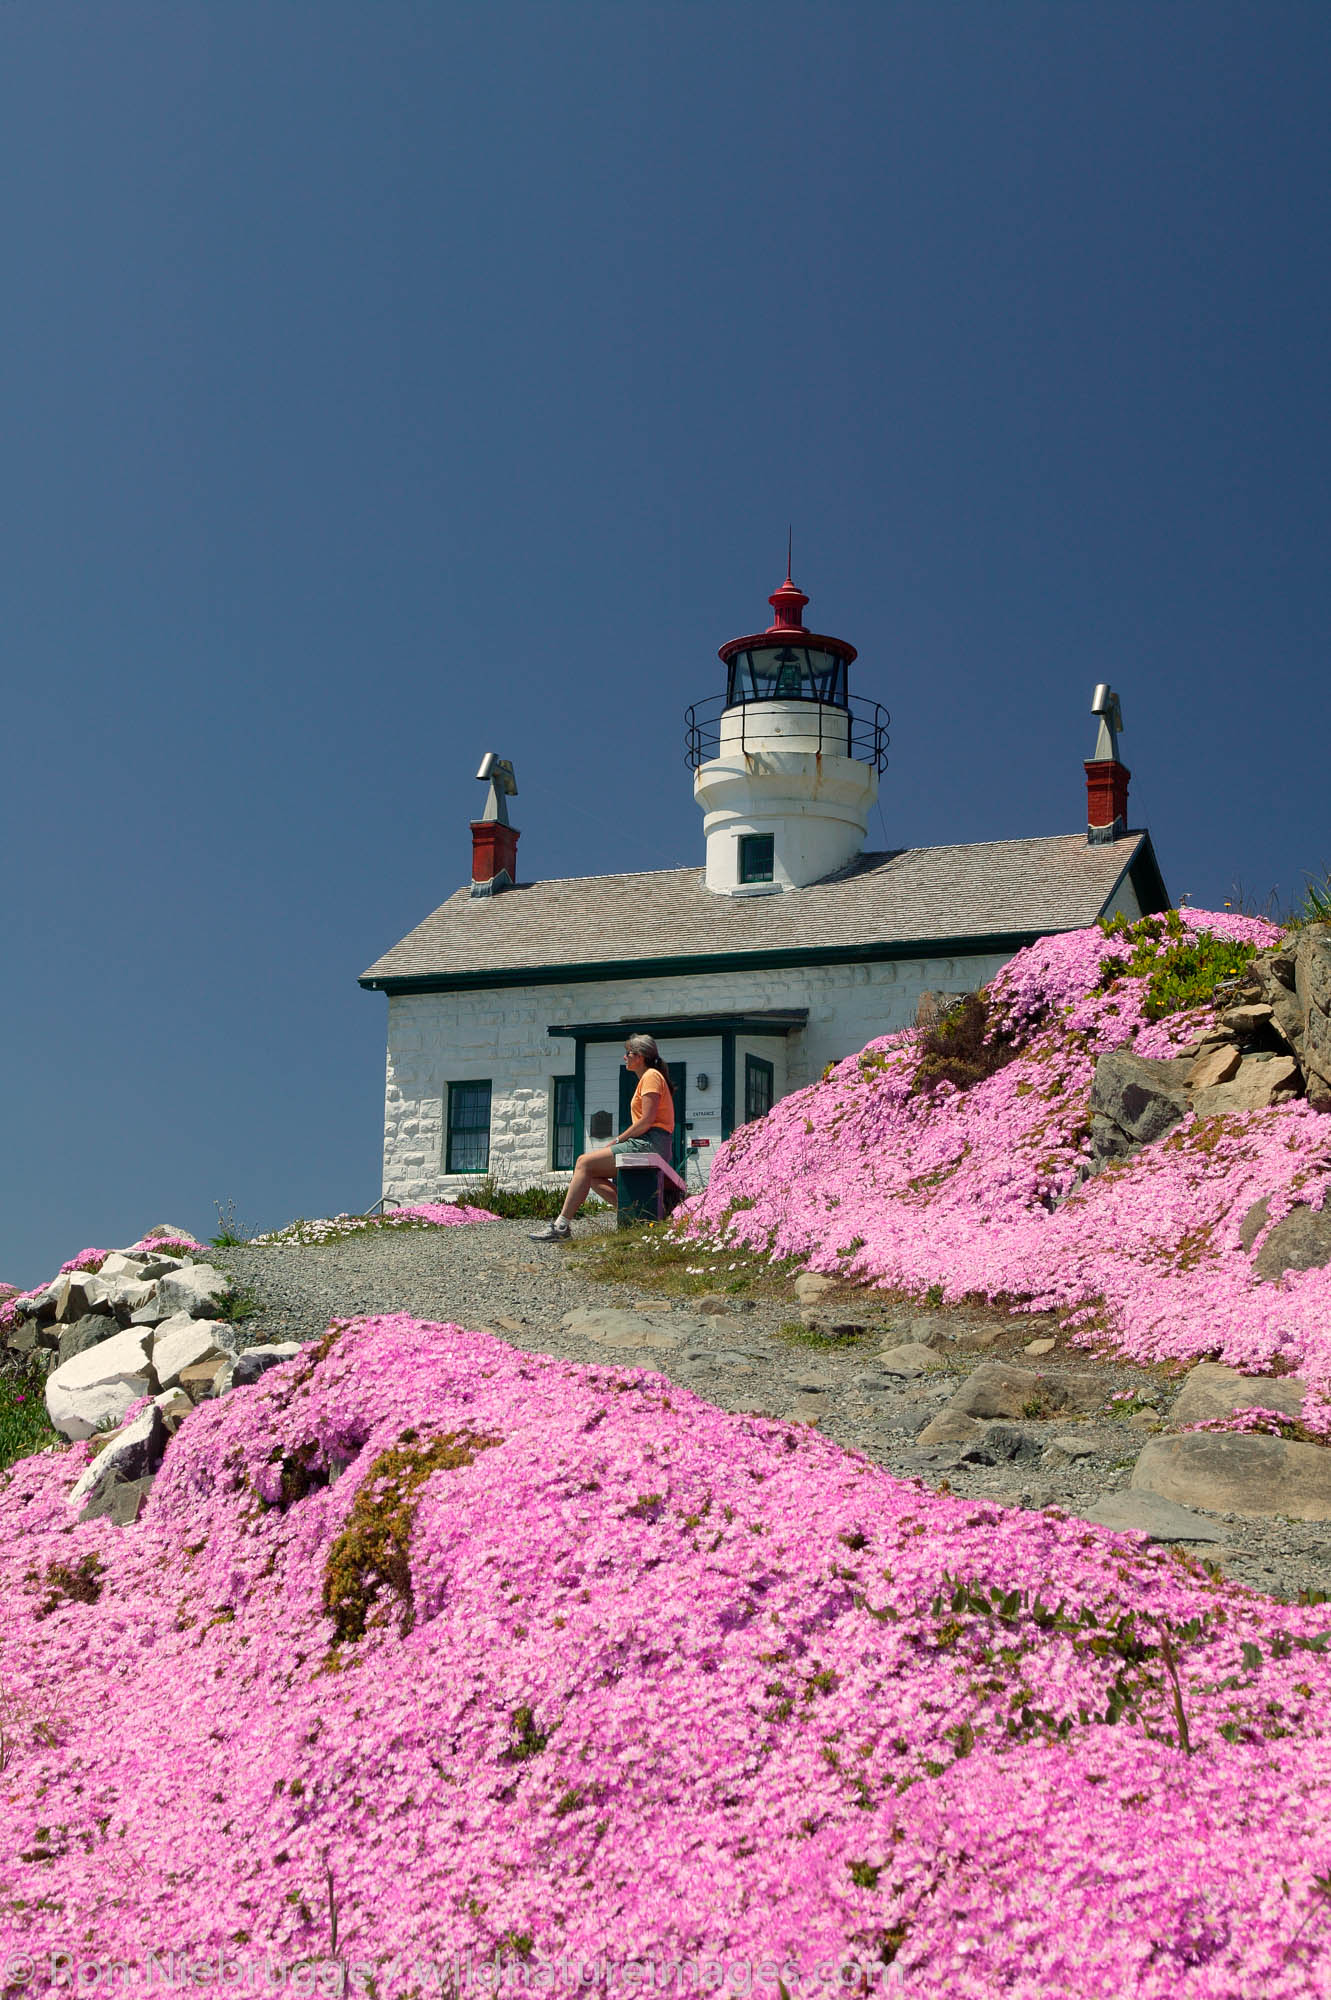 Battery Point Lighthouse, Crescent City, California.